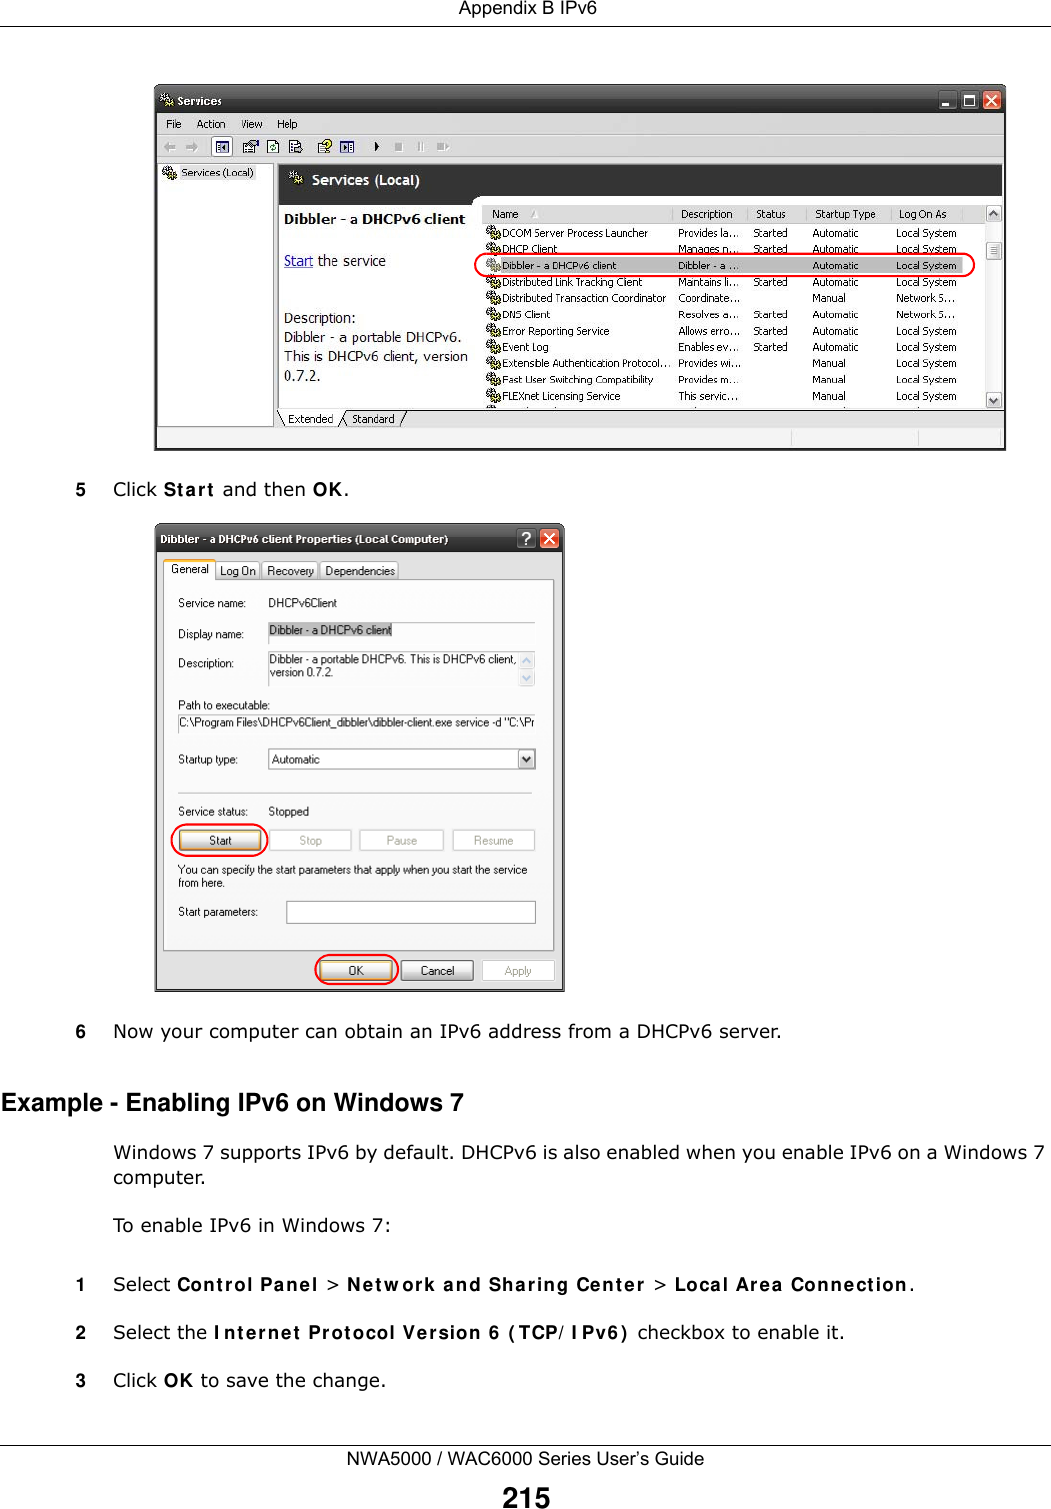  Appendix B IPv6NWA5000 / WAC6000 Series User’s Guide2155Click Start and then OK.6Now your computer can obtain an IPv6 address from a DHCPv6 server.Example - Enabling IPv6 on Windows 7Windows 7 supports IPv6 by default. DHCPv6 is also enabled when you enable IPv6 on a Windows 7 computer.To enable IPv6 in Windows 7:1Select Control Panel &gt; Network and Sharing Center &gt; Local Area Connection.2Select the Internet Protocol Version 6 (TCP/IPv6) checkbox to enable it.3Click OK to save the change.